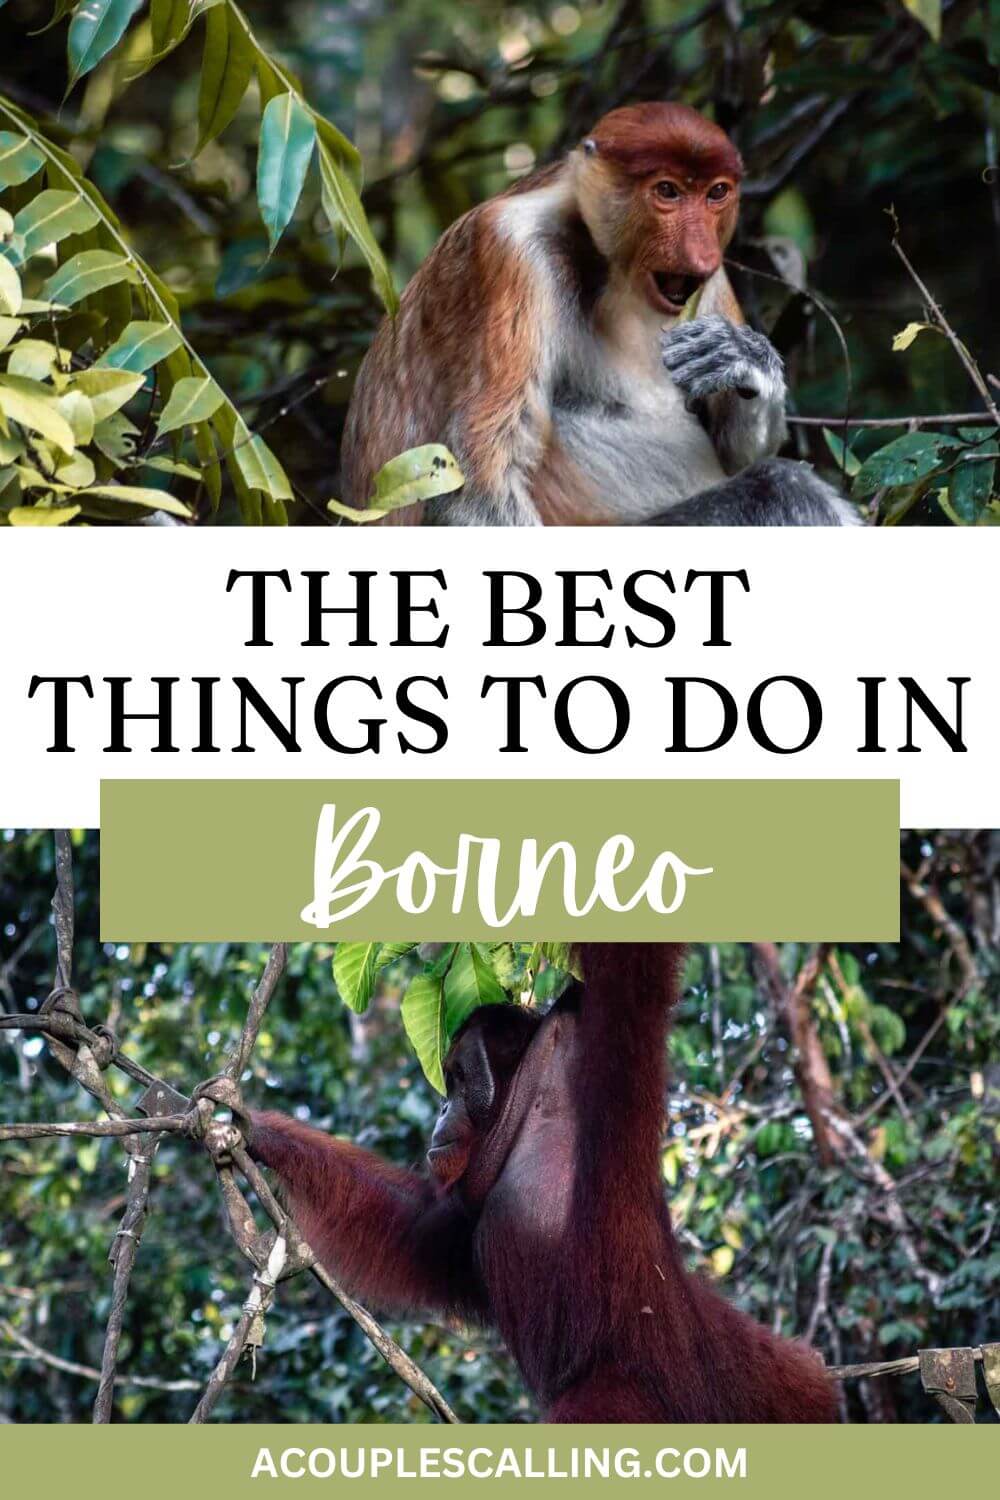 Things to do in Borneo